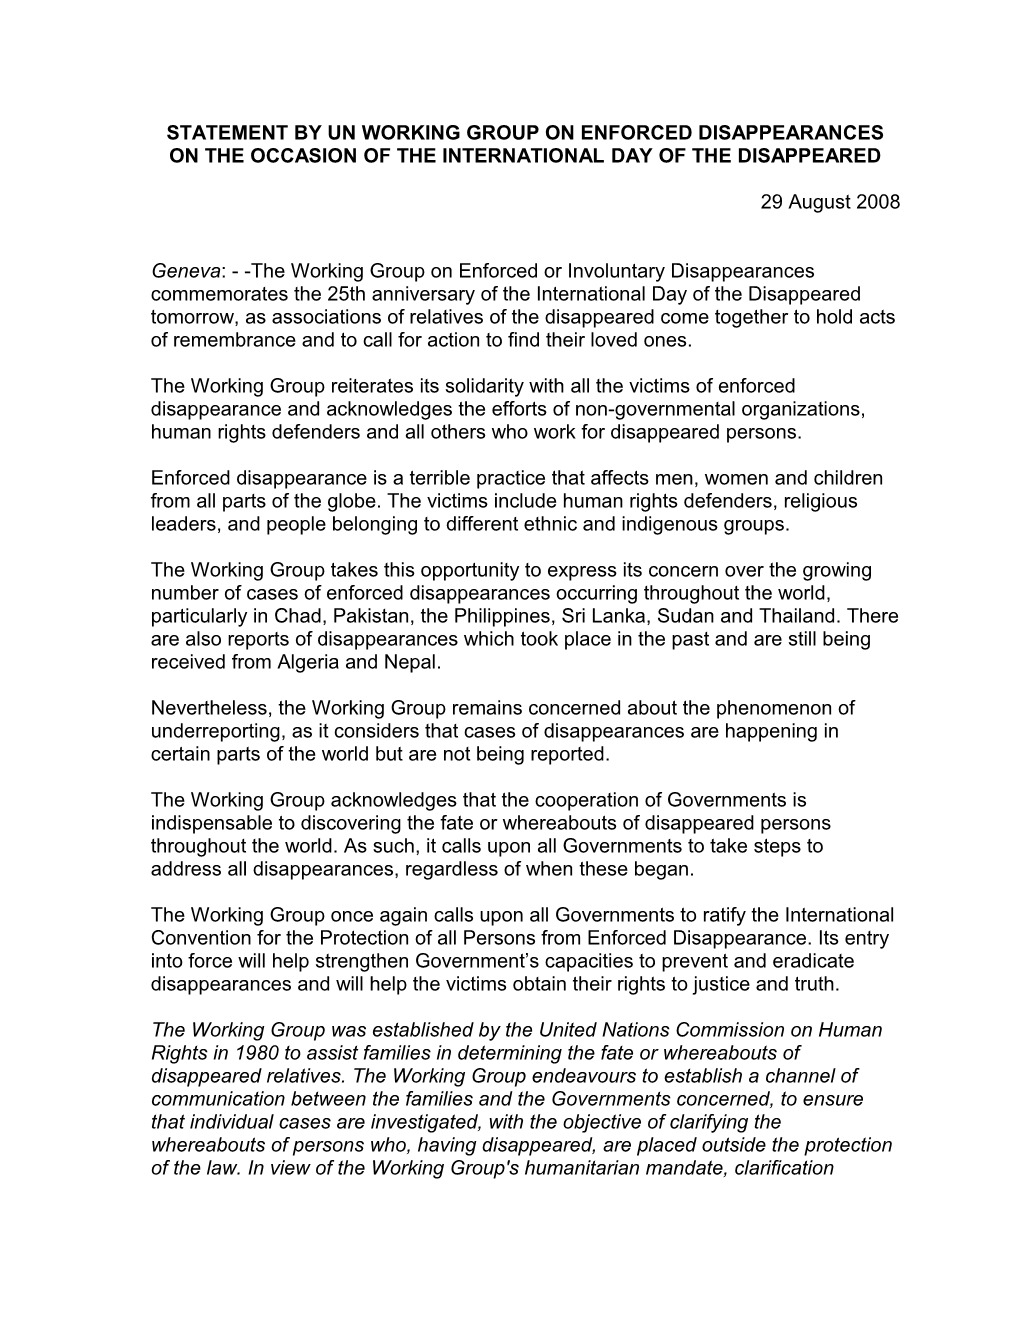 Statement by Un Working Group on Enforced Disappearances on the Occasion of the International